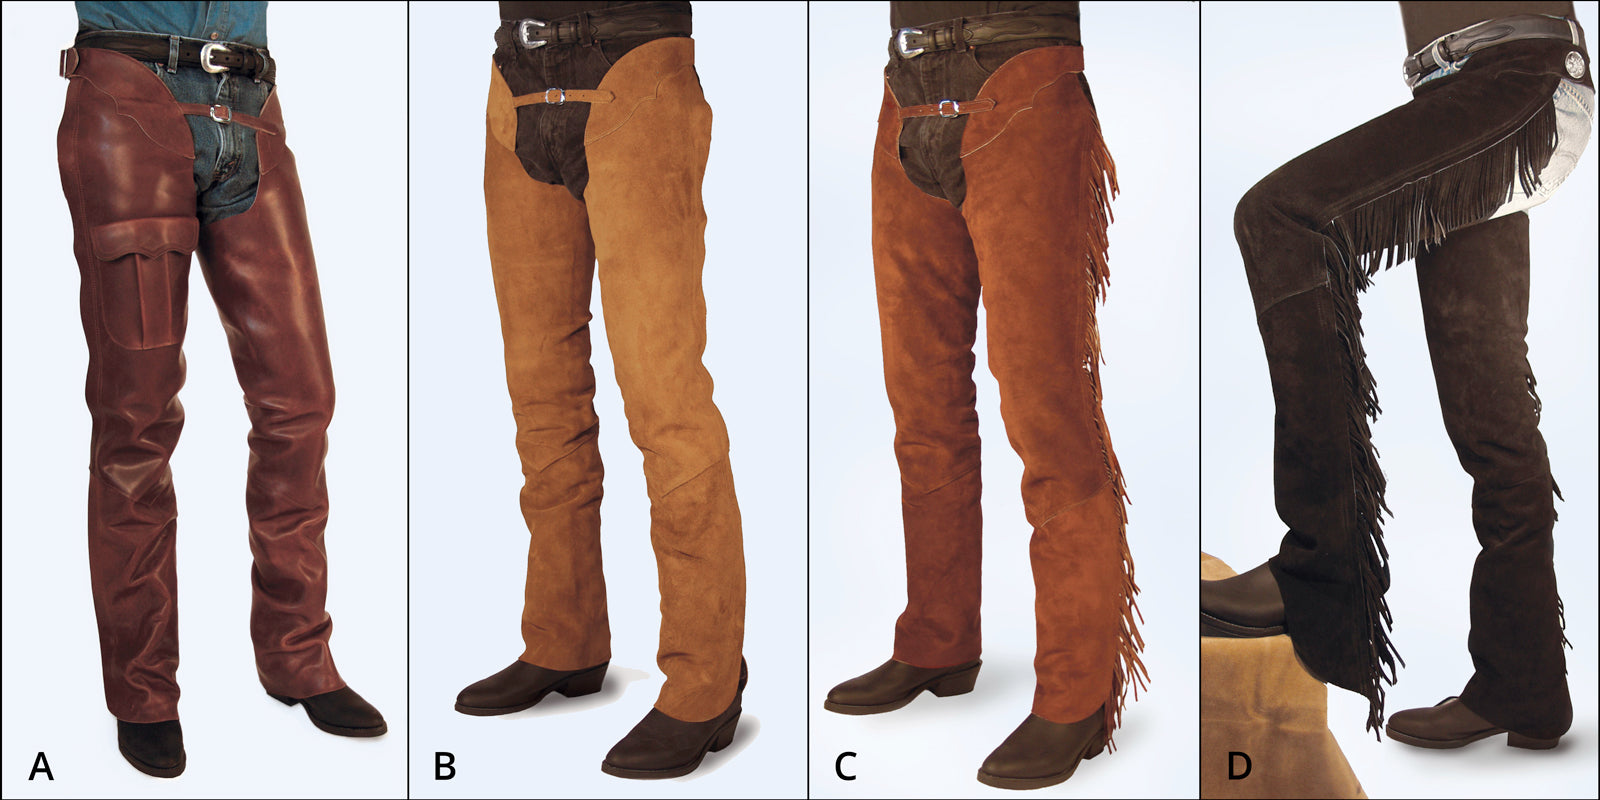 western-chaps-four-styles-1600x800pixels-labeled.jpg